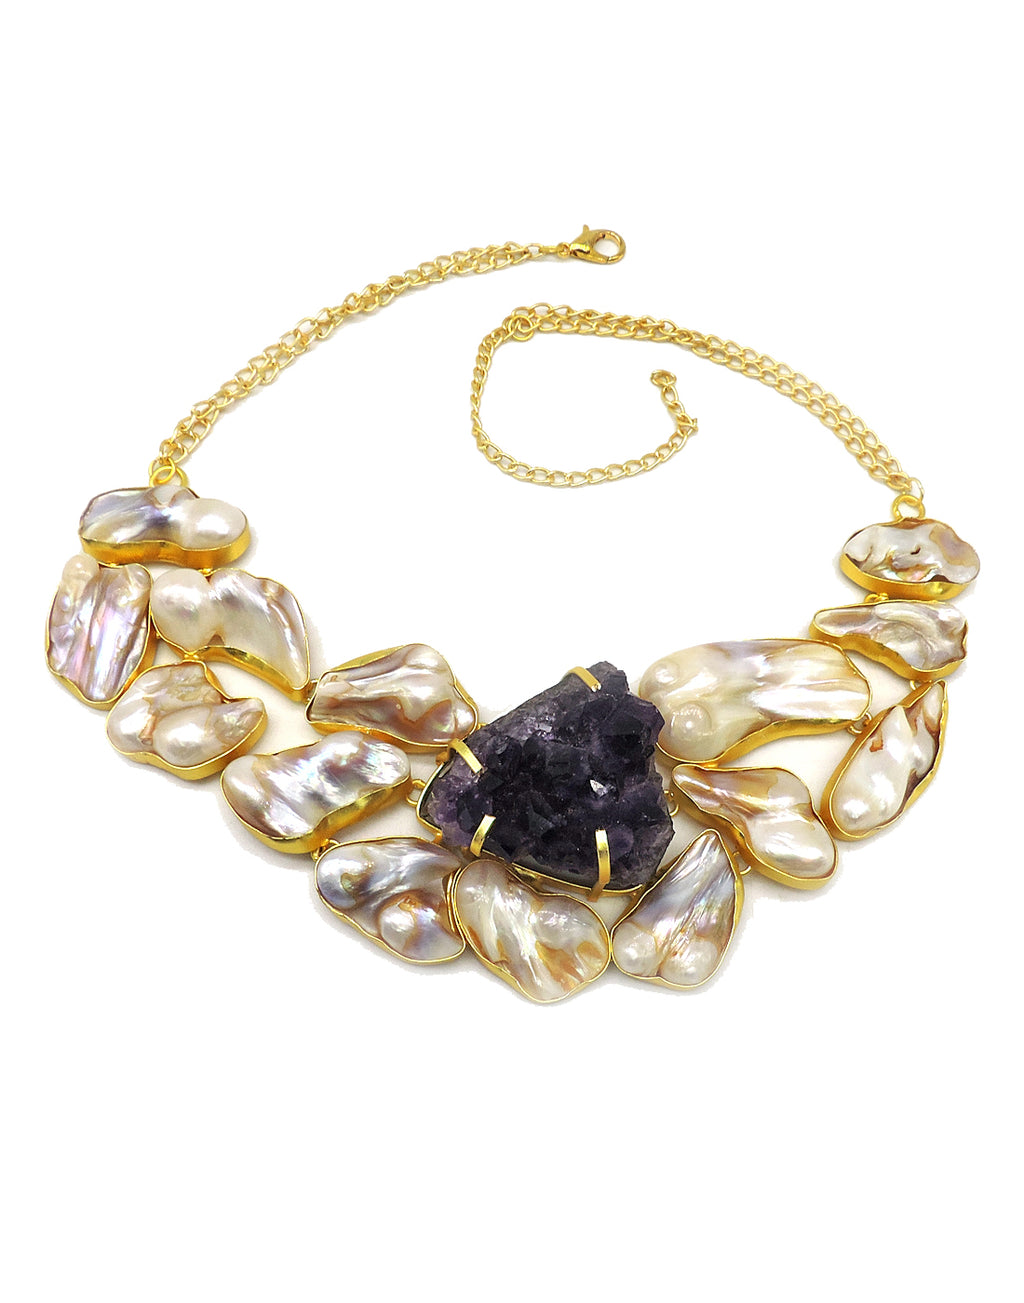 Amethyst & Baroque Pearl Necklace - Statement Necklaces - Gold-Plated & Hypoallergenic Jewellery - Made in India - Dubai Jewellery - Dori